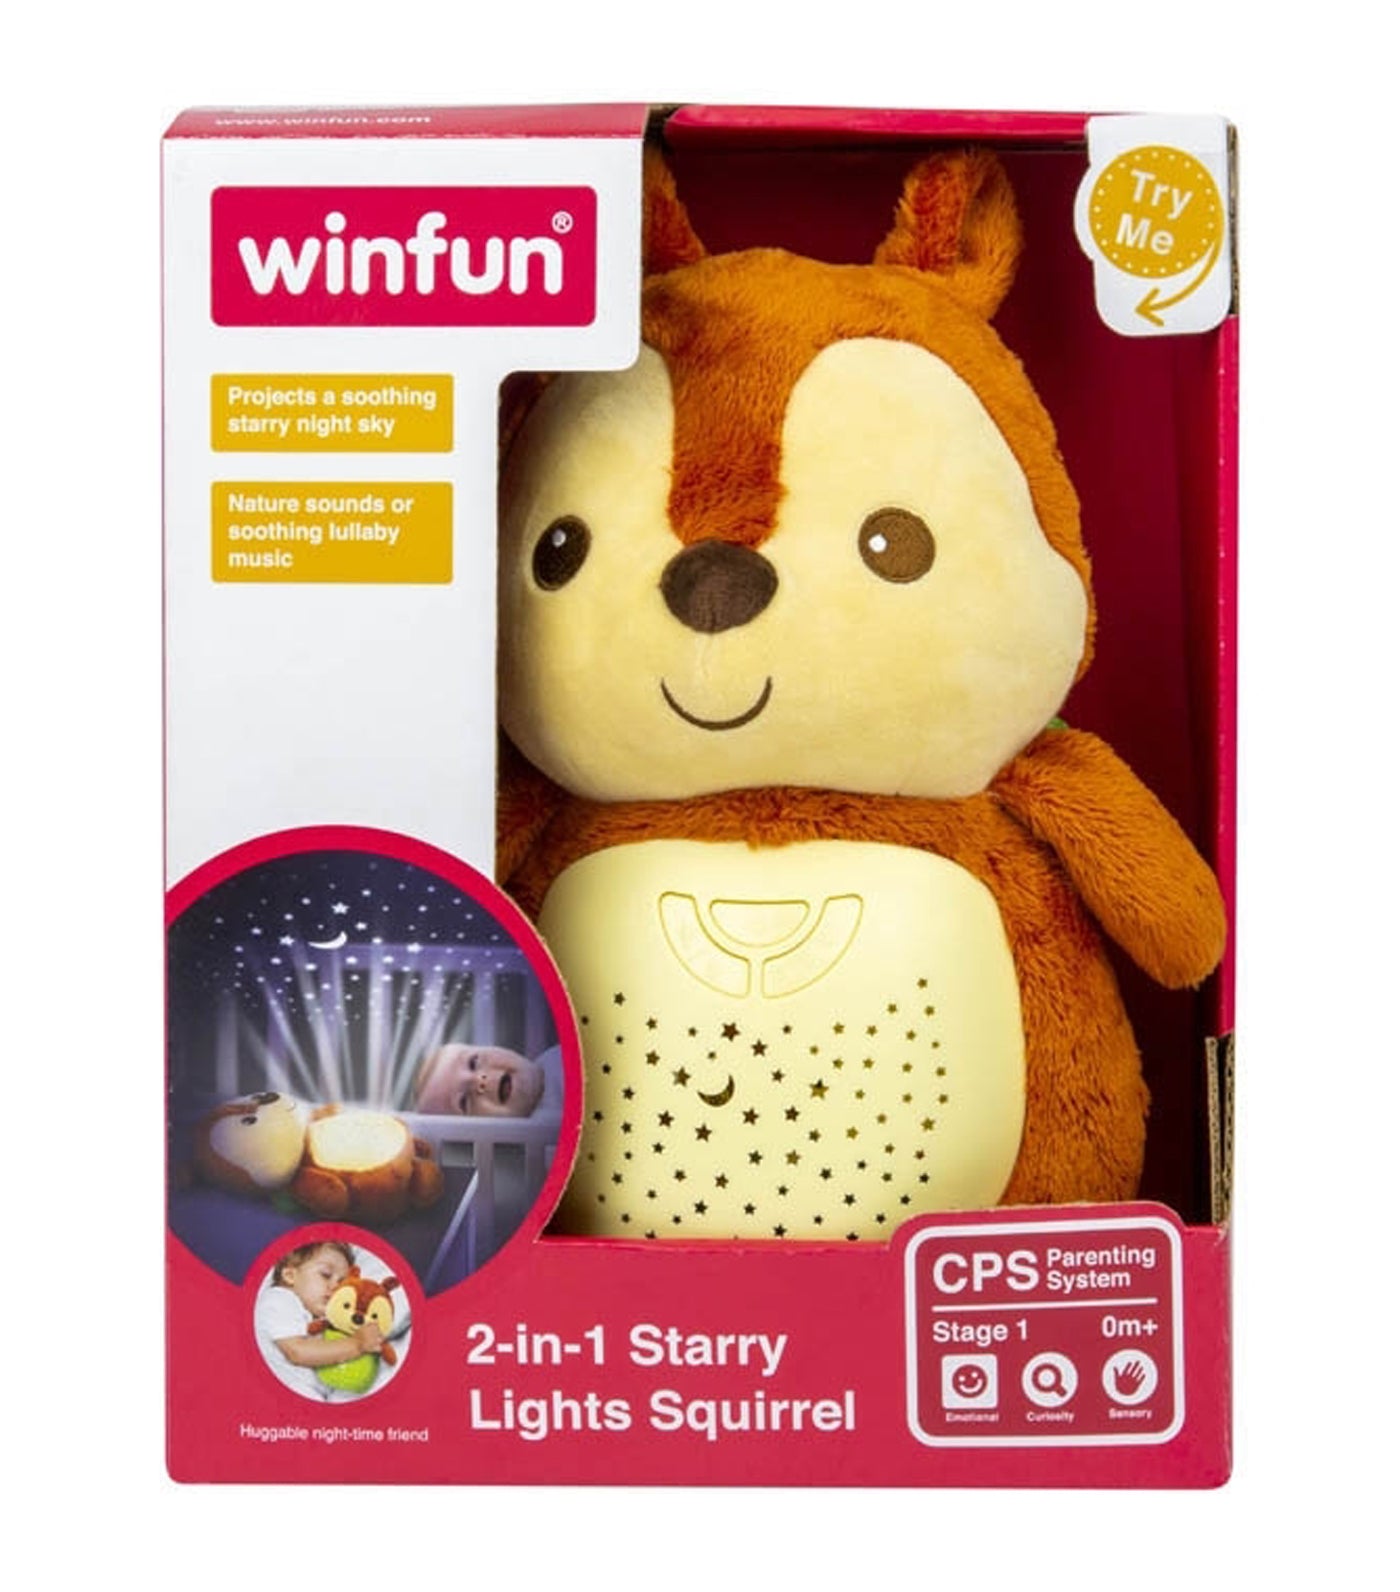 2-in-1 Starry Lights Squirrel